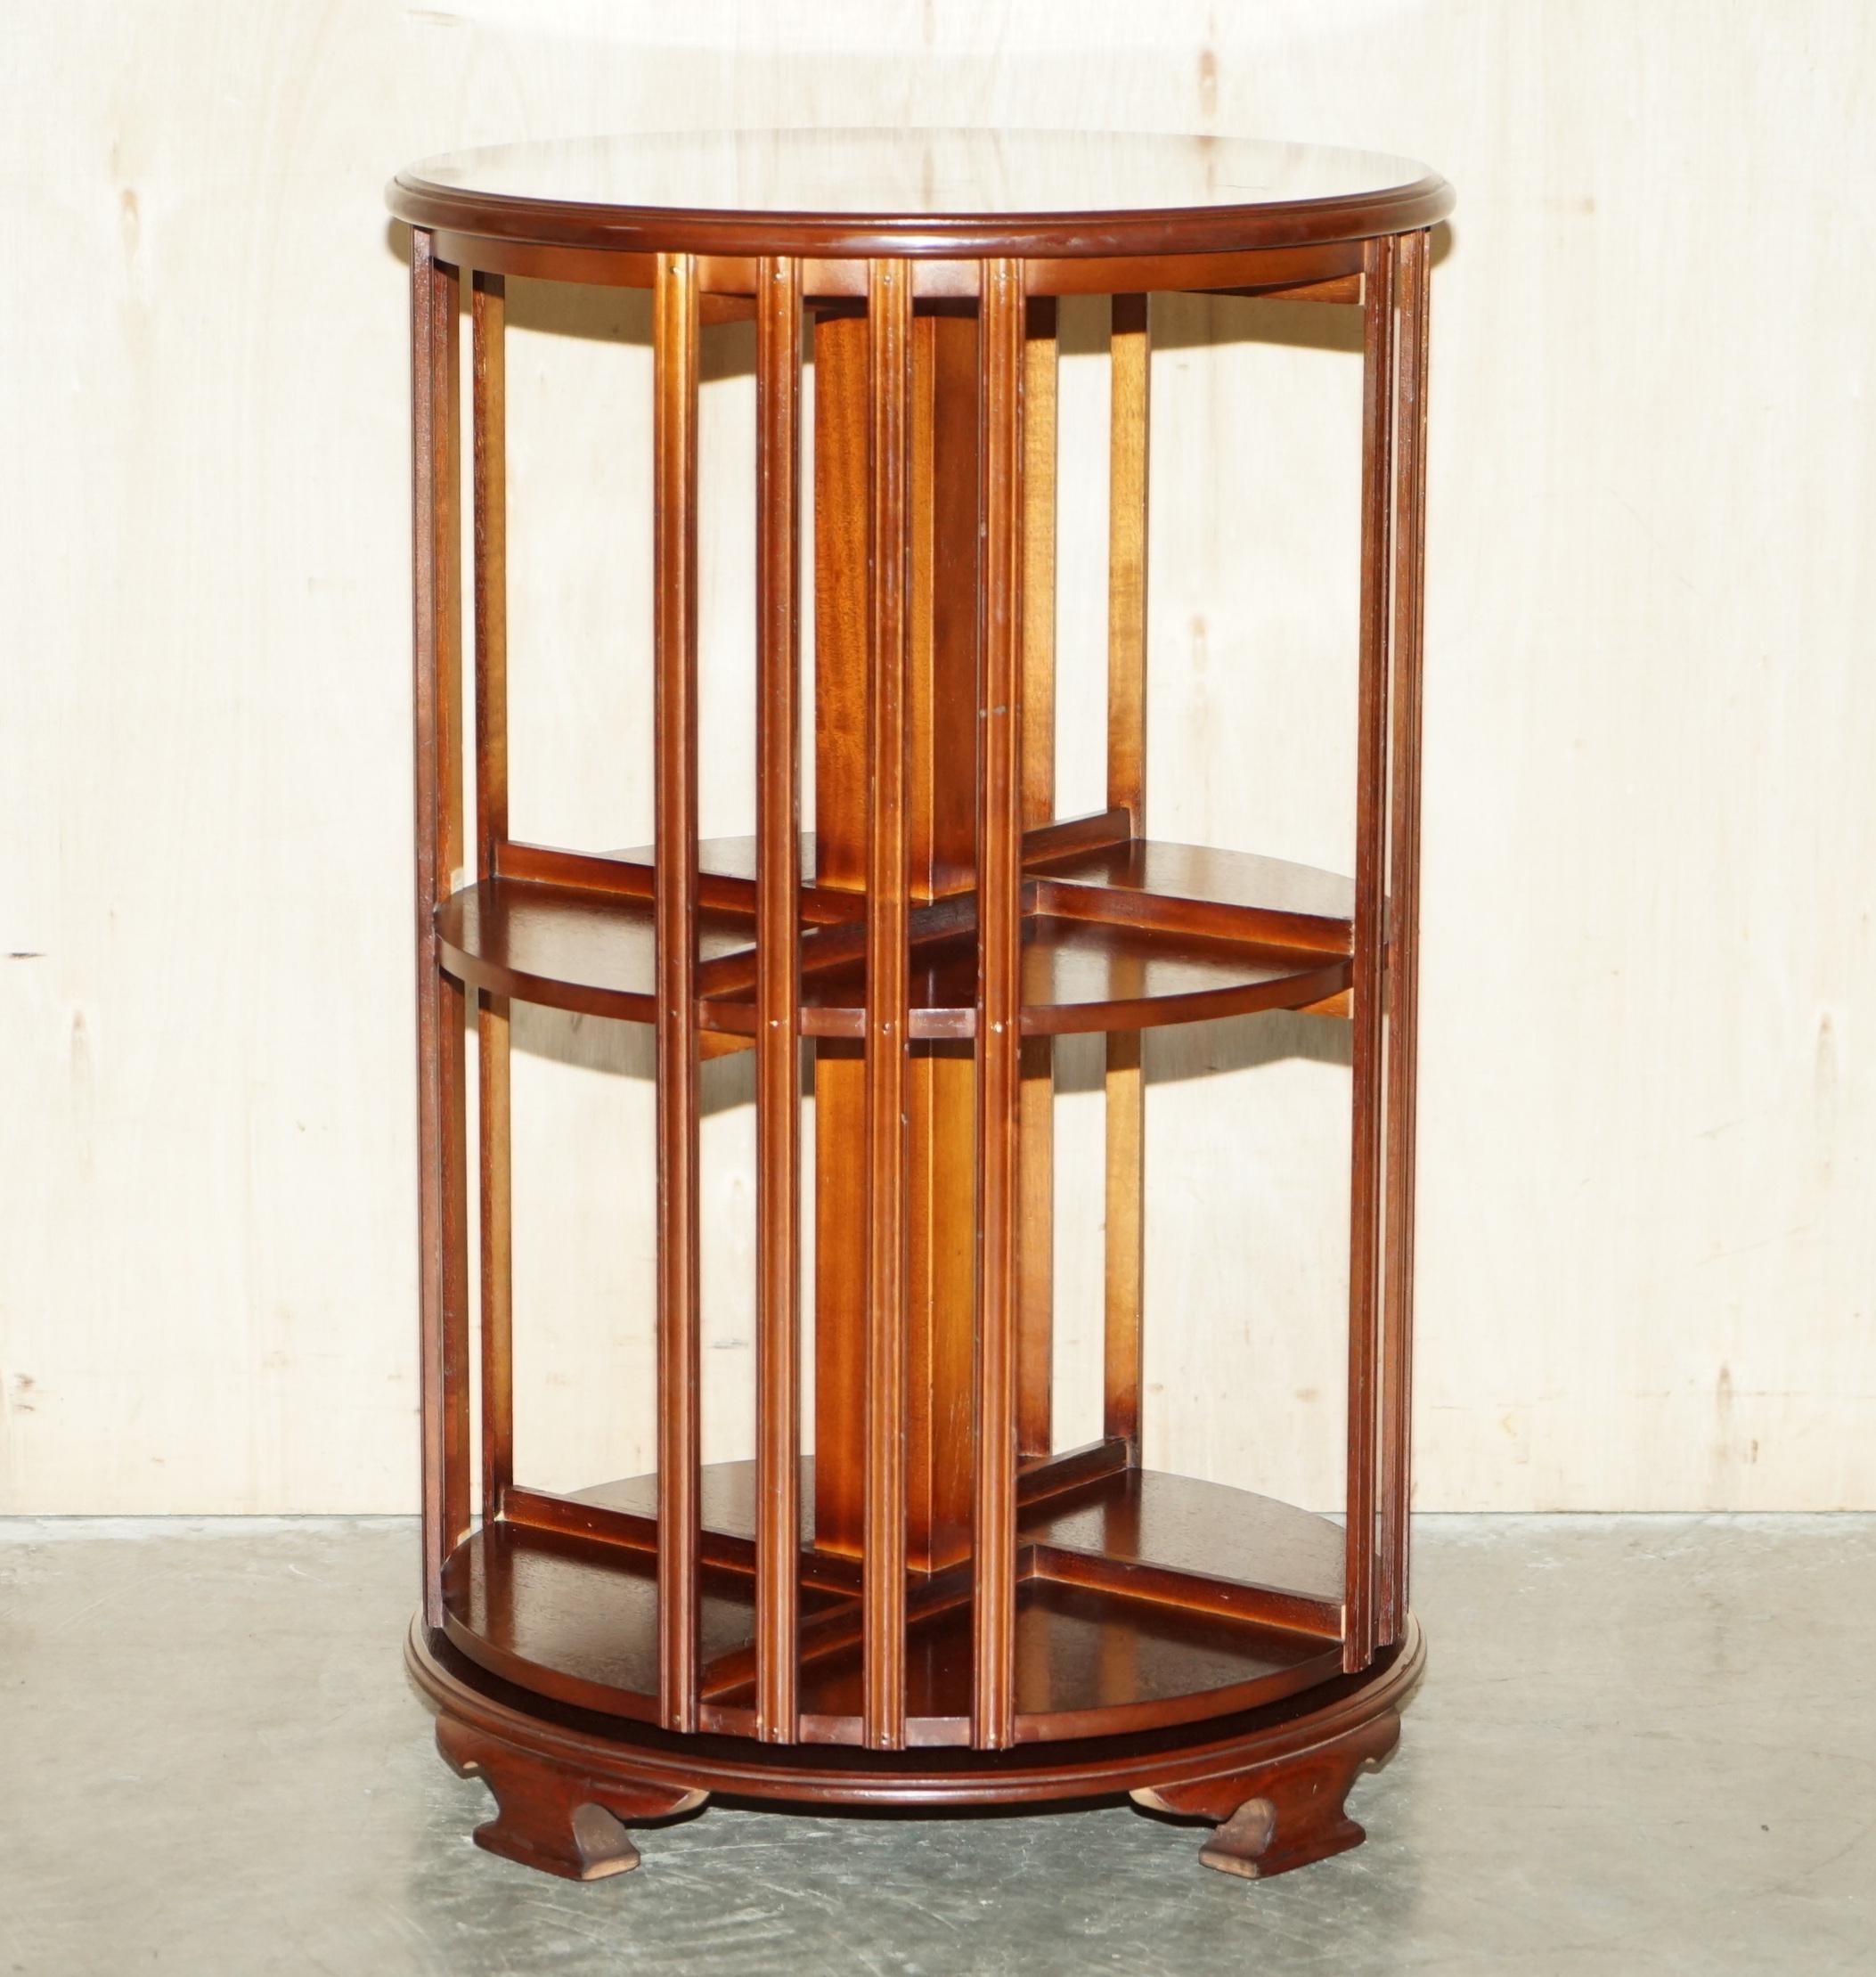 Royal House Antiques

Royal House Antiques is delighted to offer for sale this stunning vintage round Sheraton Revival Mahogany & Satinwood revolving bookcase table

Please note the delivery fee listed is just a guide, it covers within the M25 only